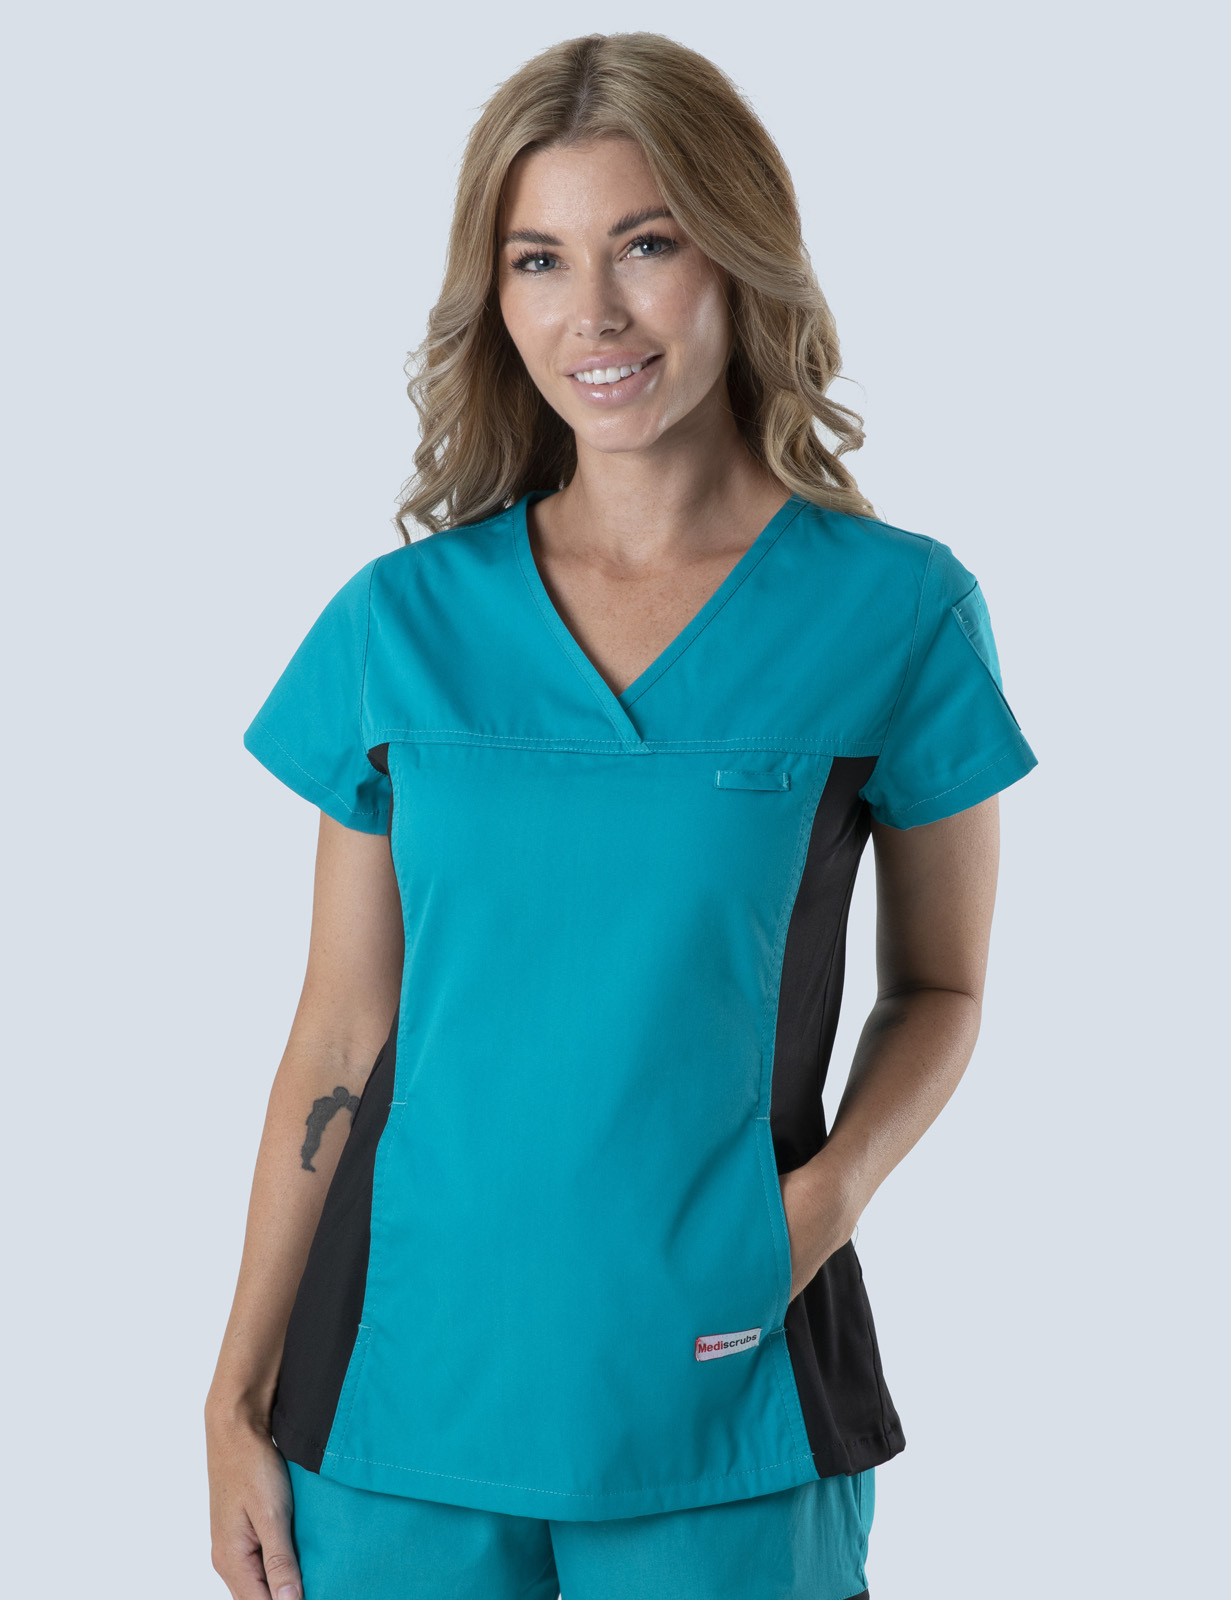 Women's Fit Solid Scrub Top With Spandex Panel - Teal - X Small